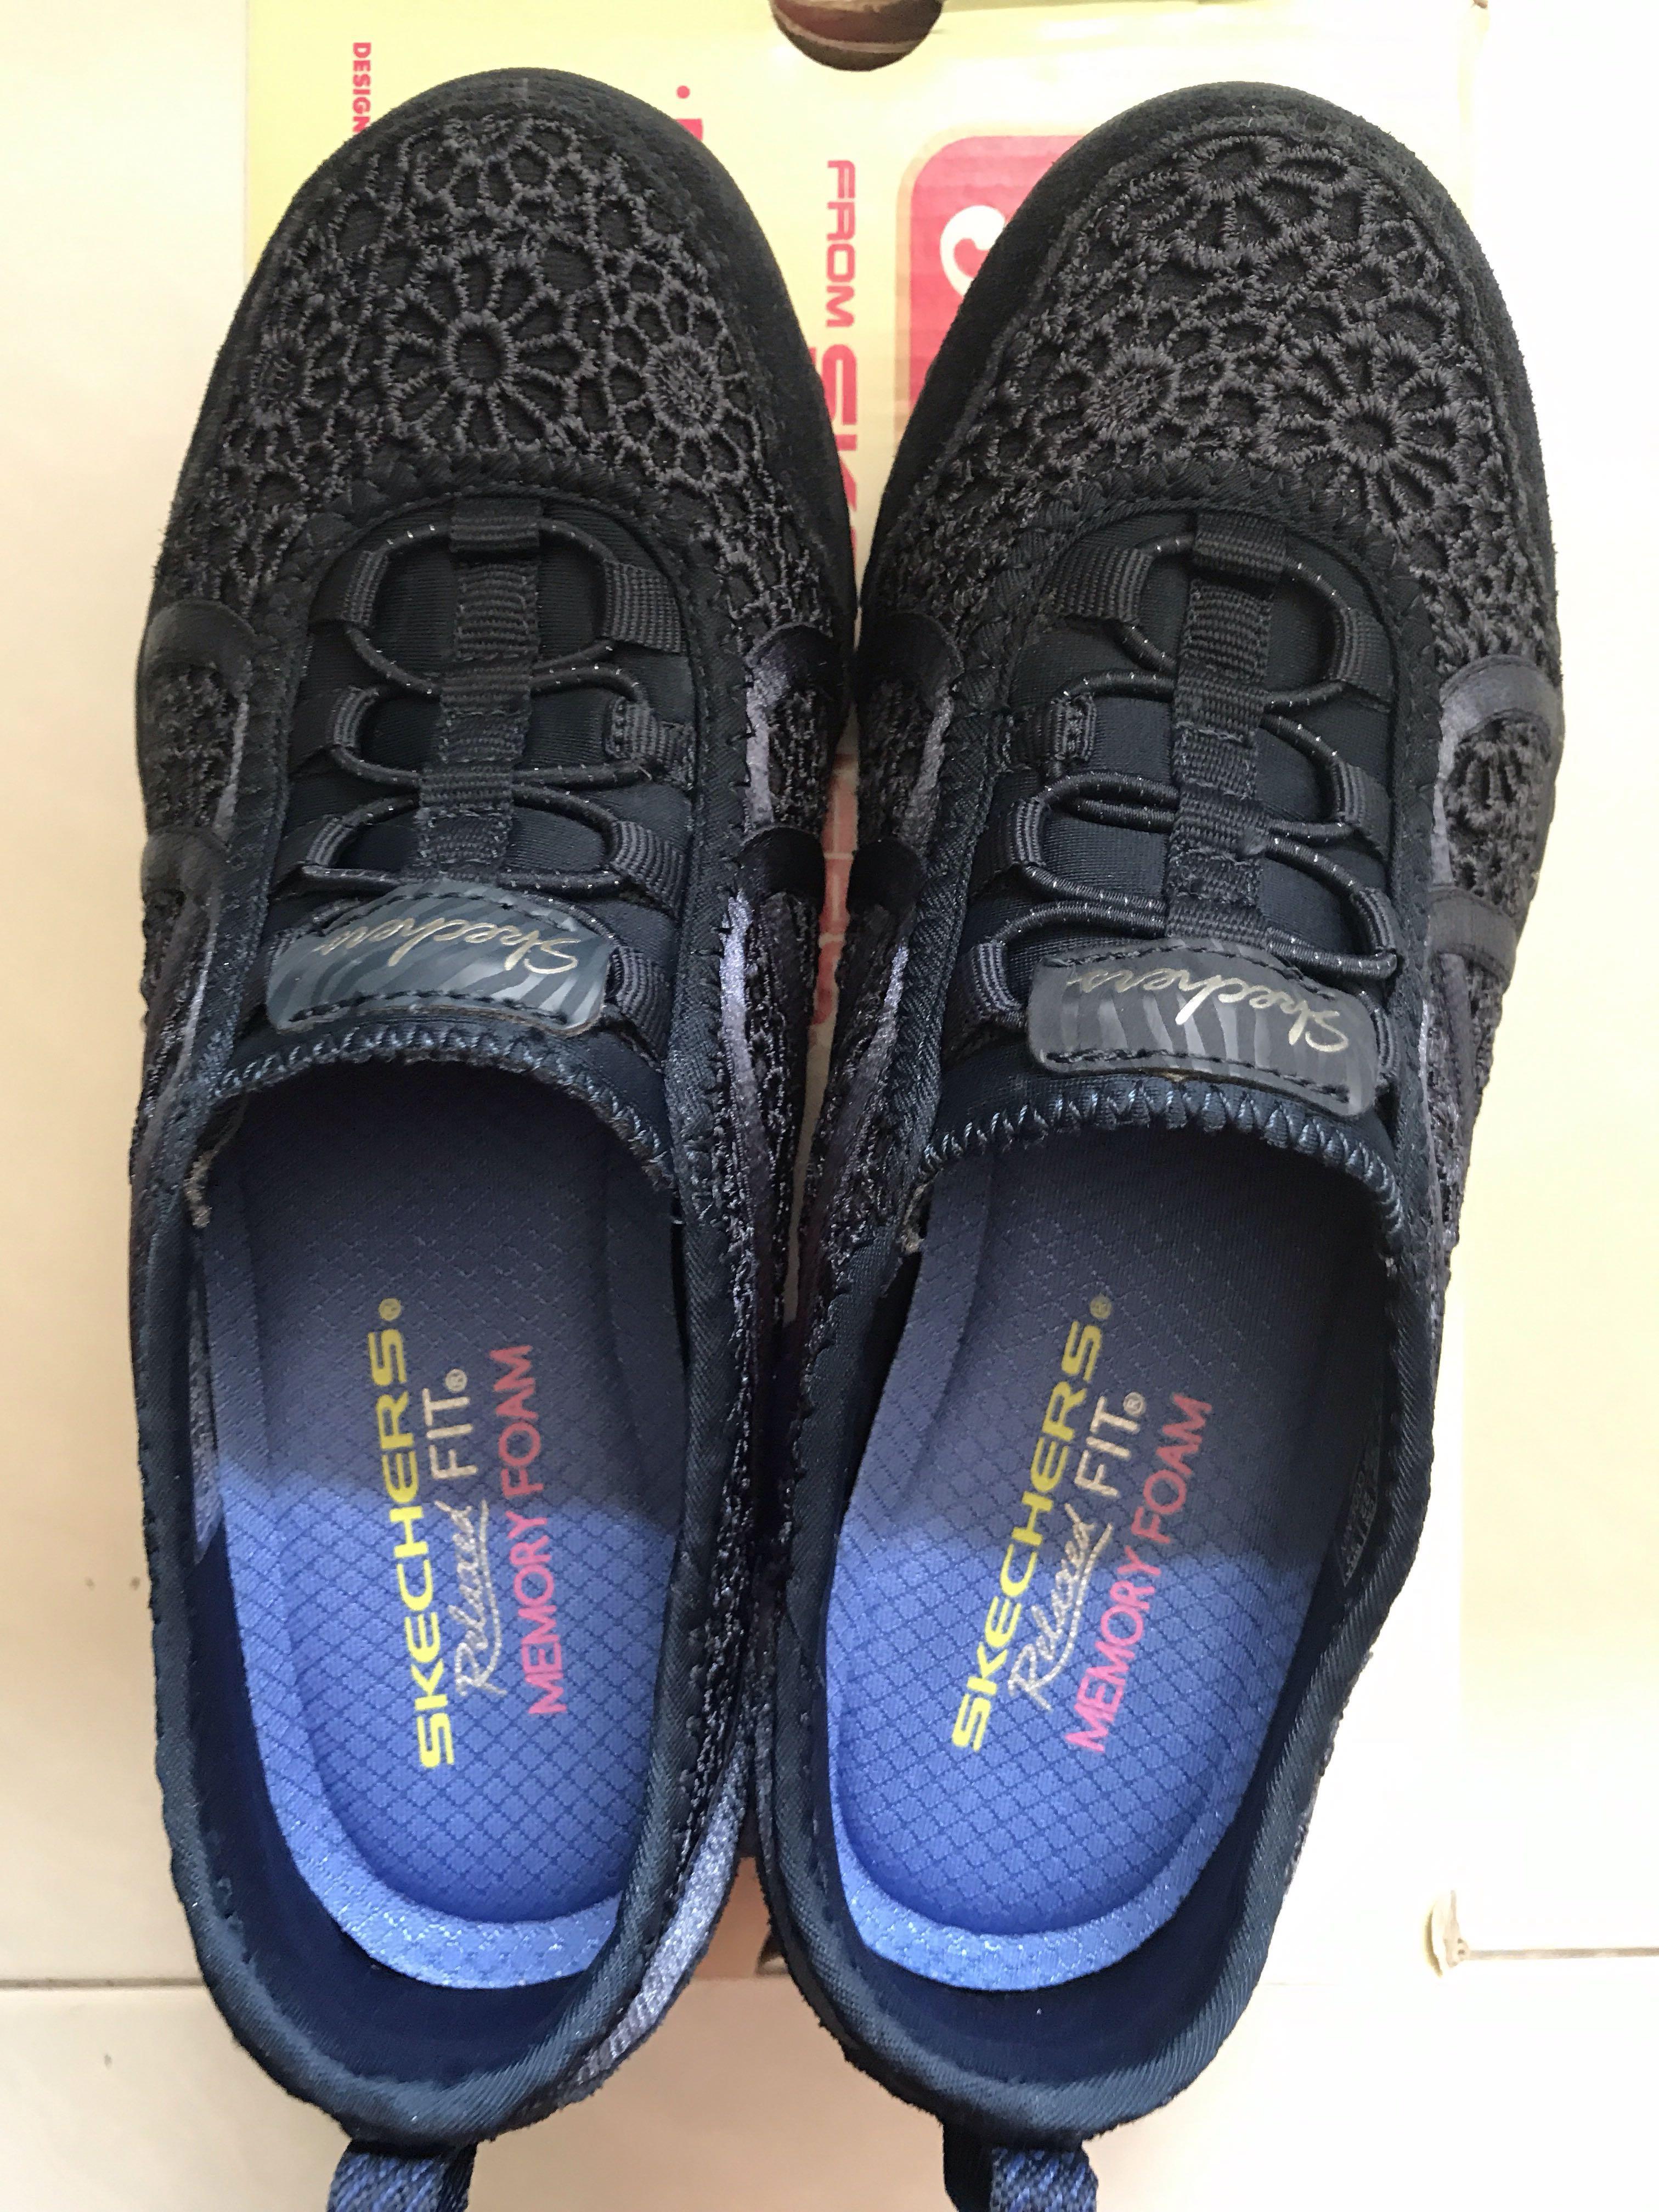 skechers relaxed fit price